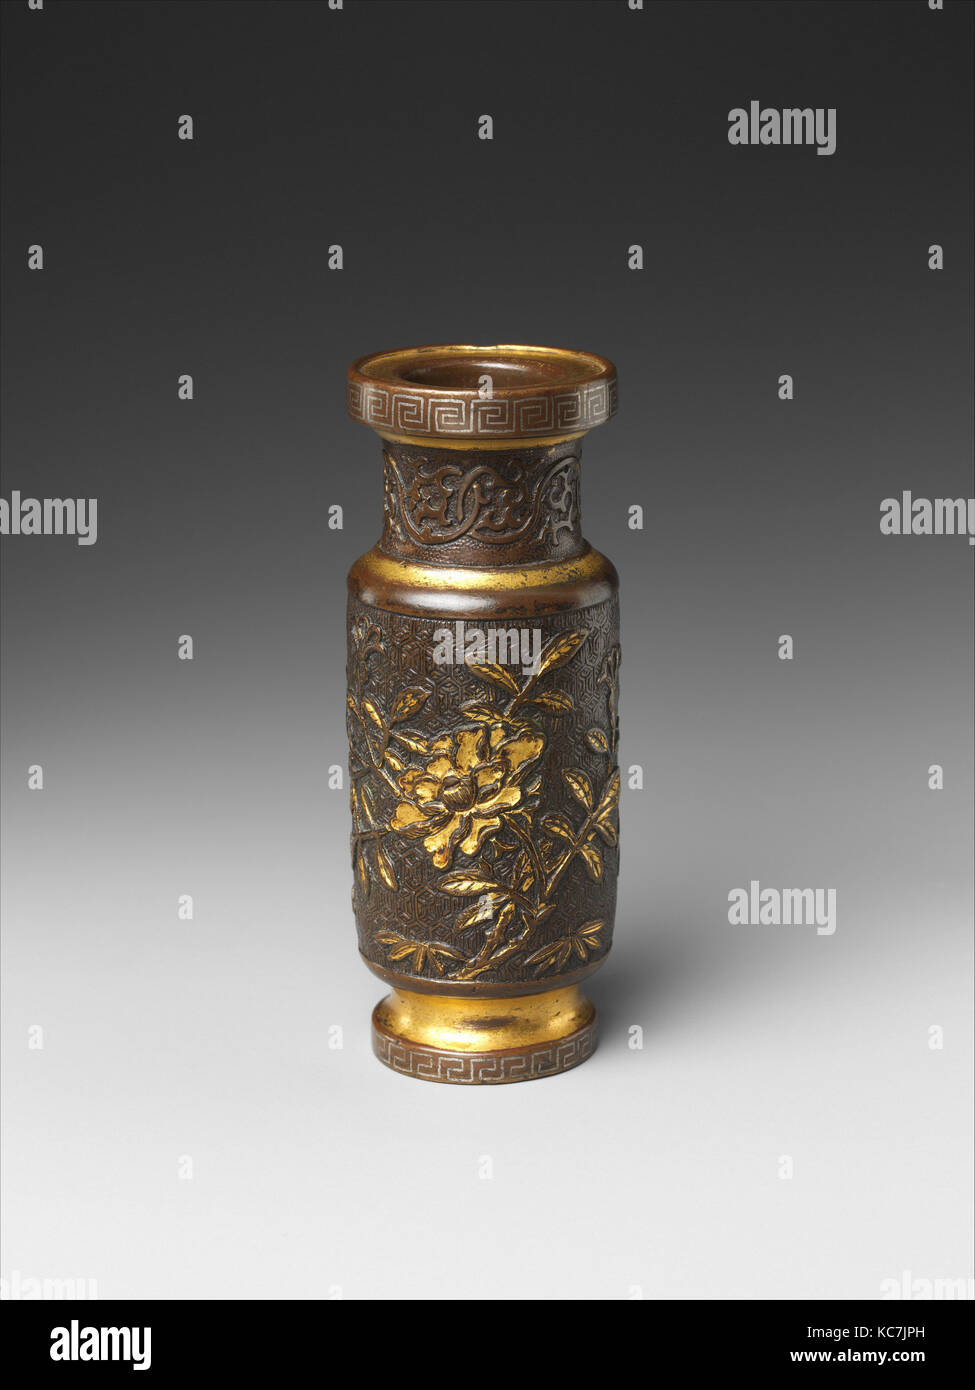 Vase, Ming dynasty (1368–1644), 16th–17th century, China, Bronze with gilding, H. 3 7/8 in. (9.8 cm), Metalwork Stock Photo